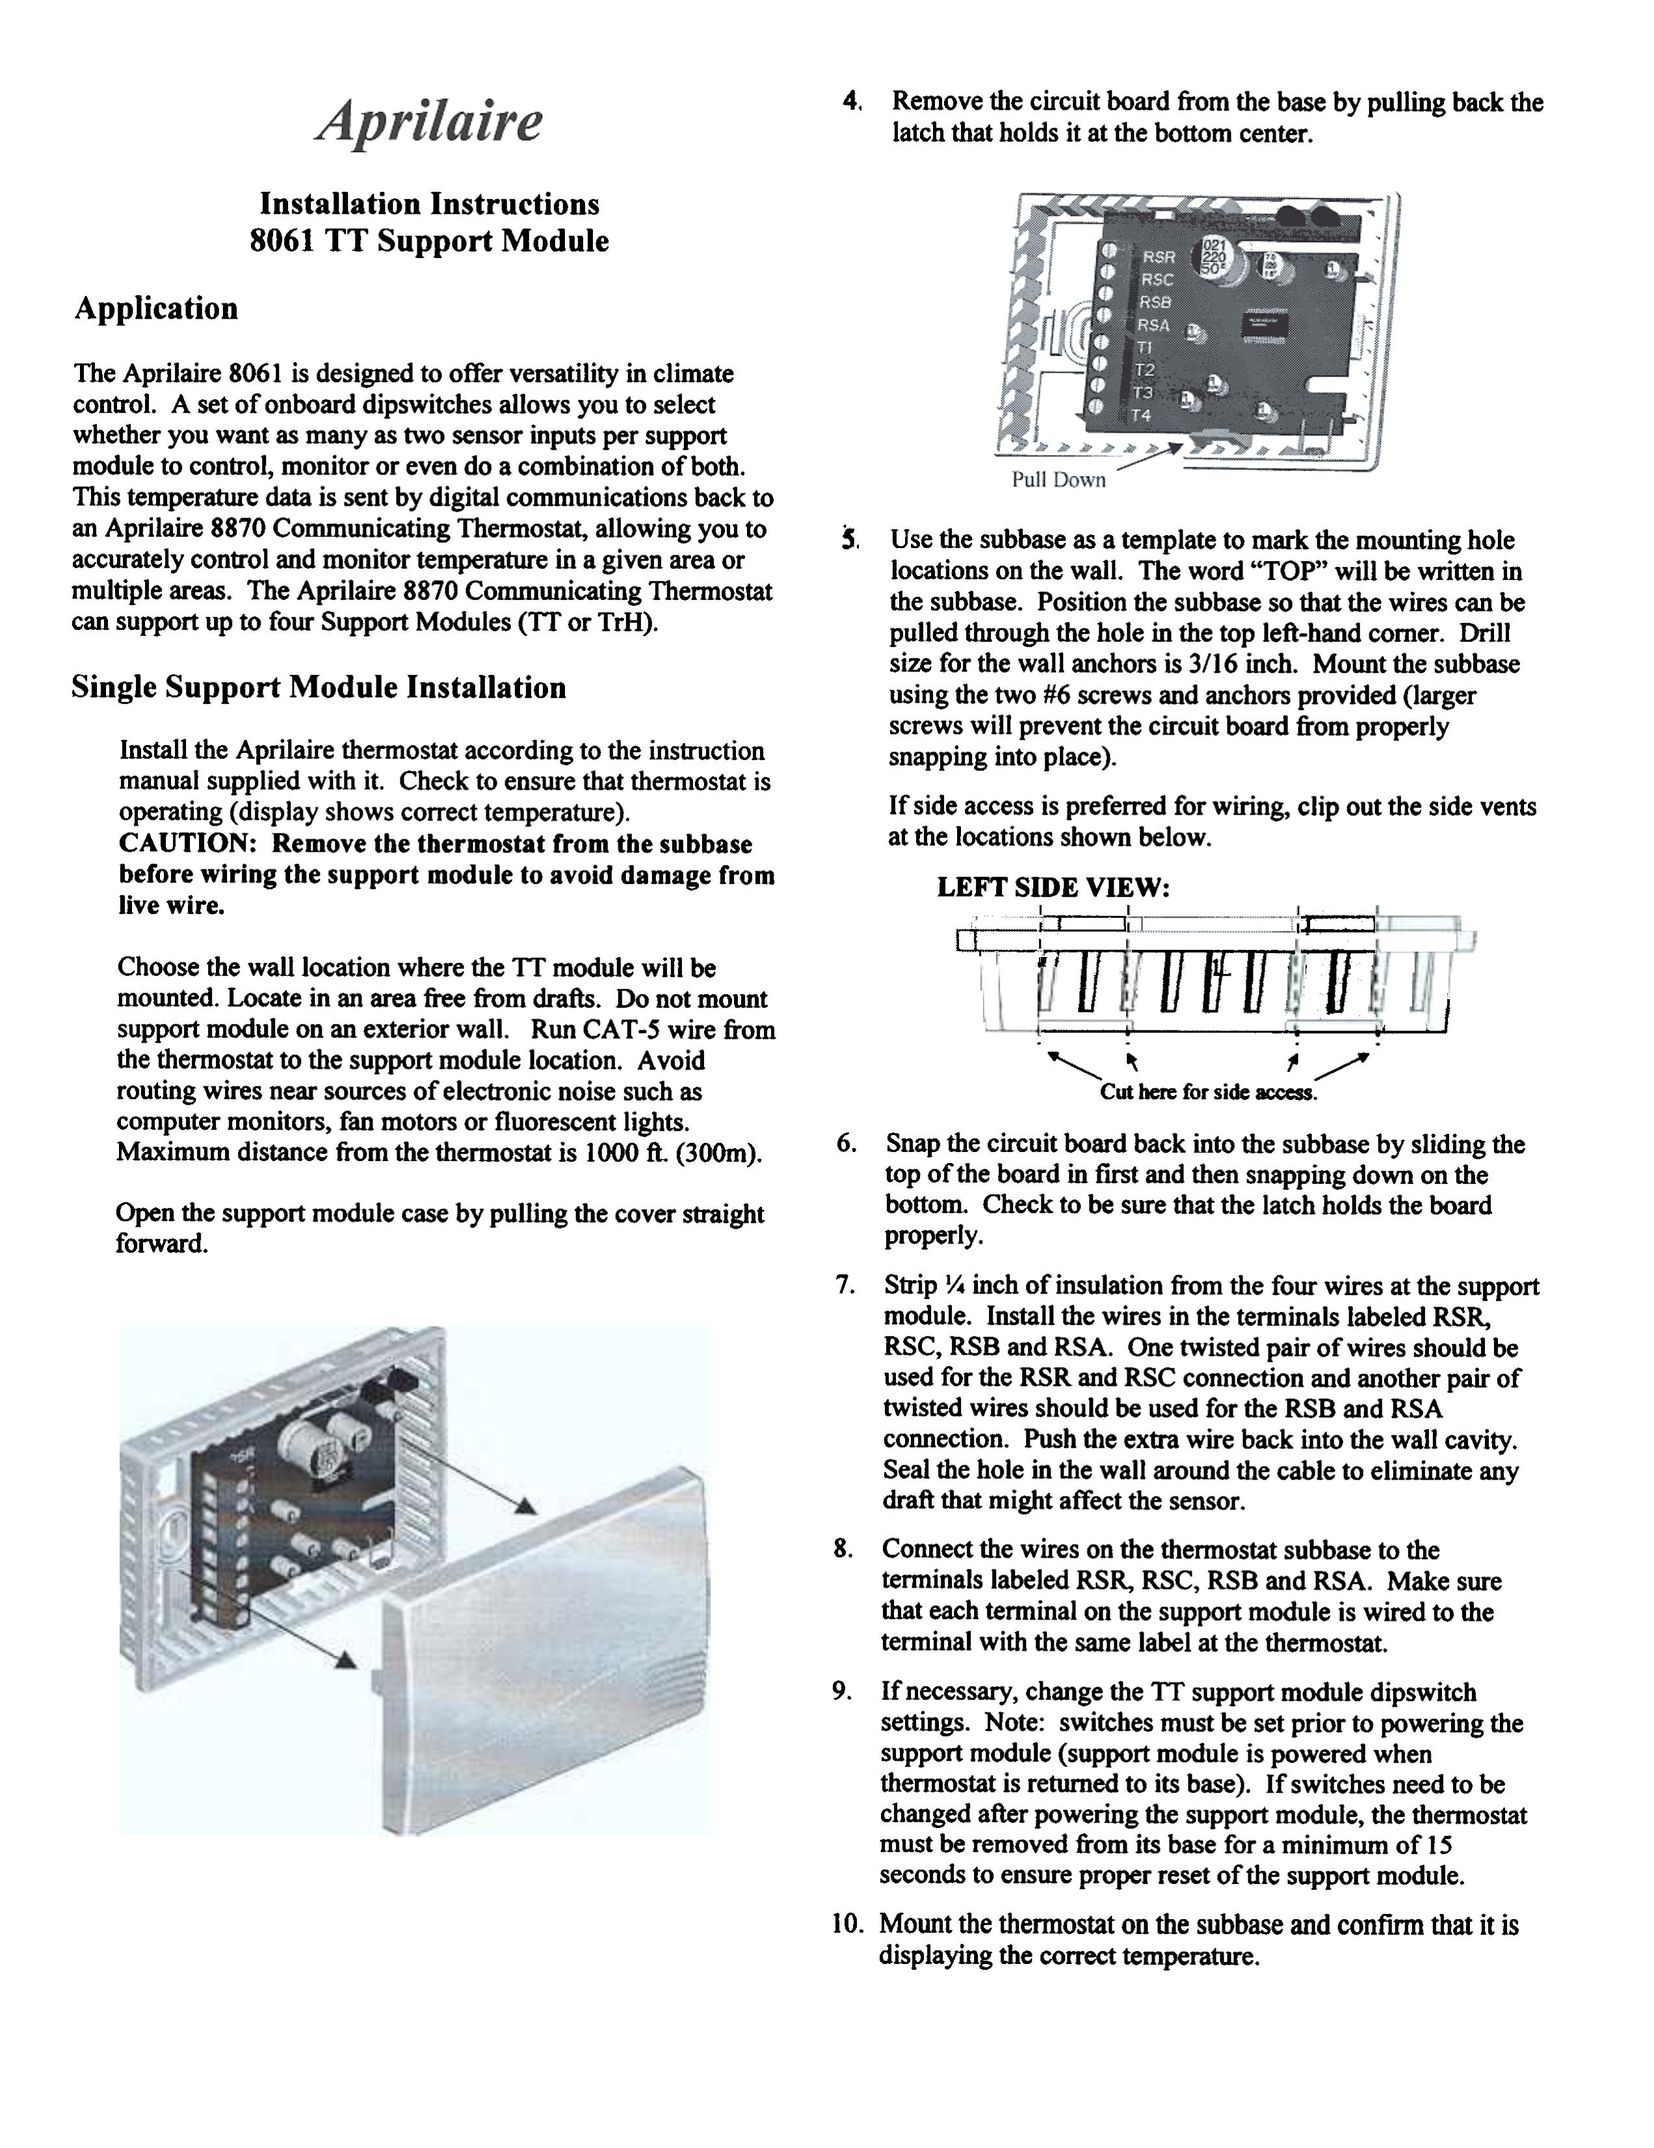 Aprilaire 8061 Thermostat User Manual